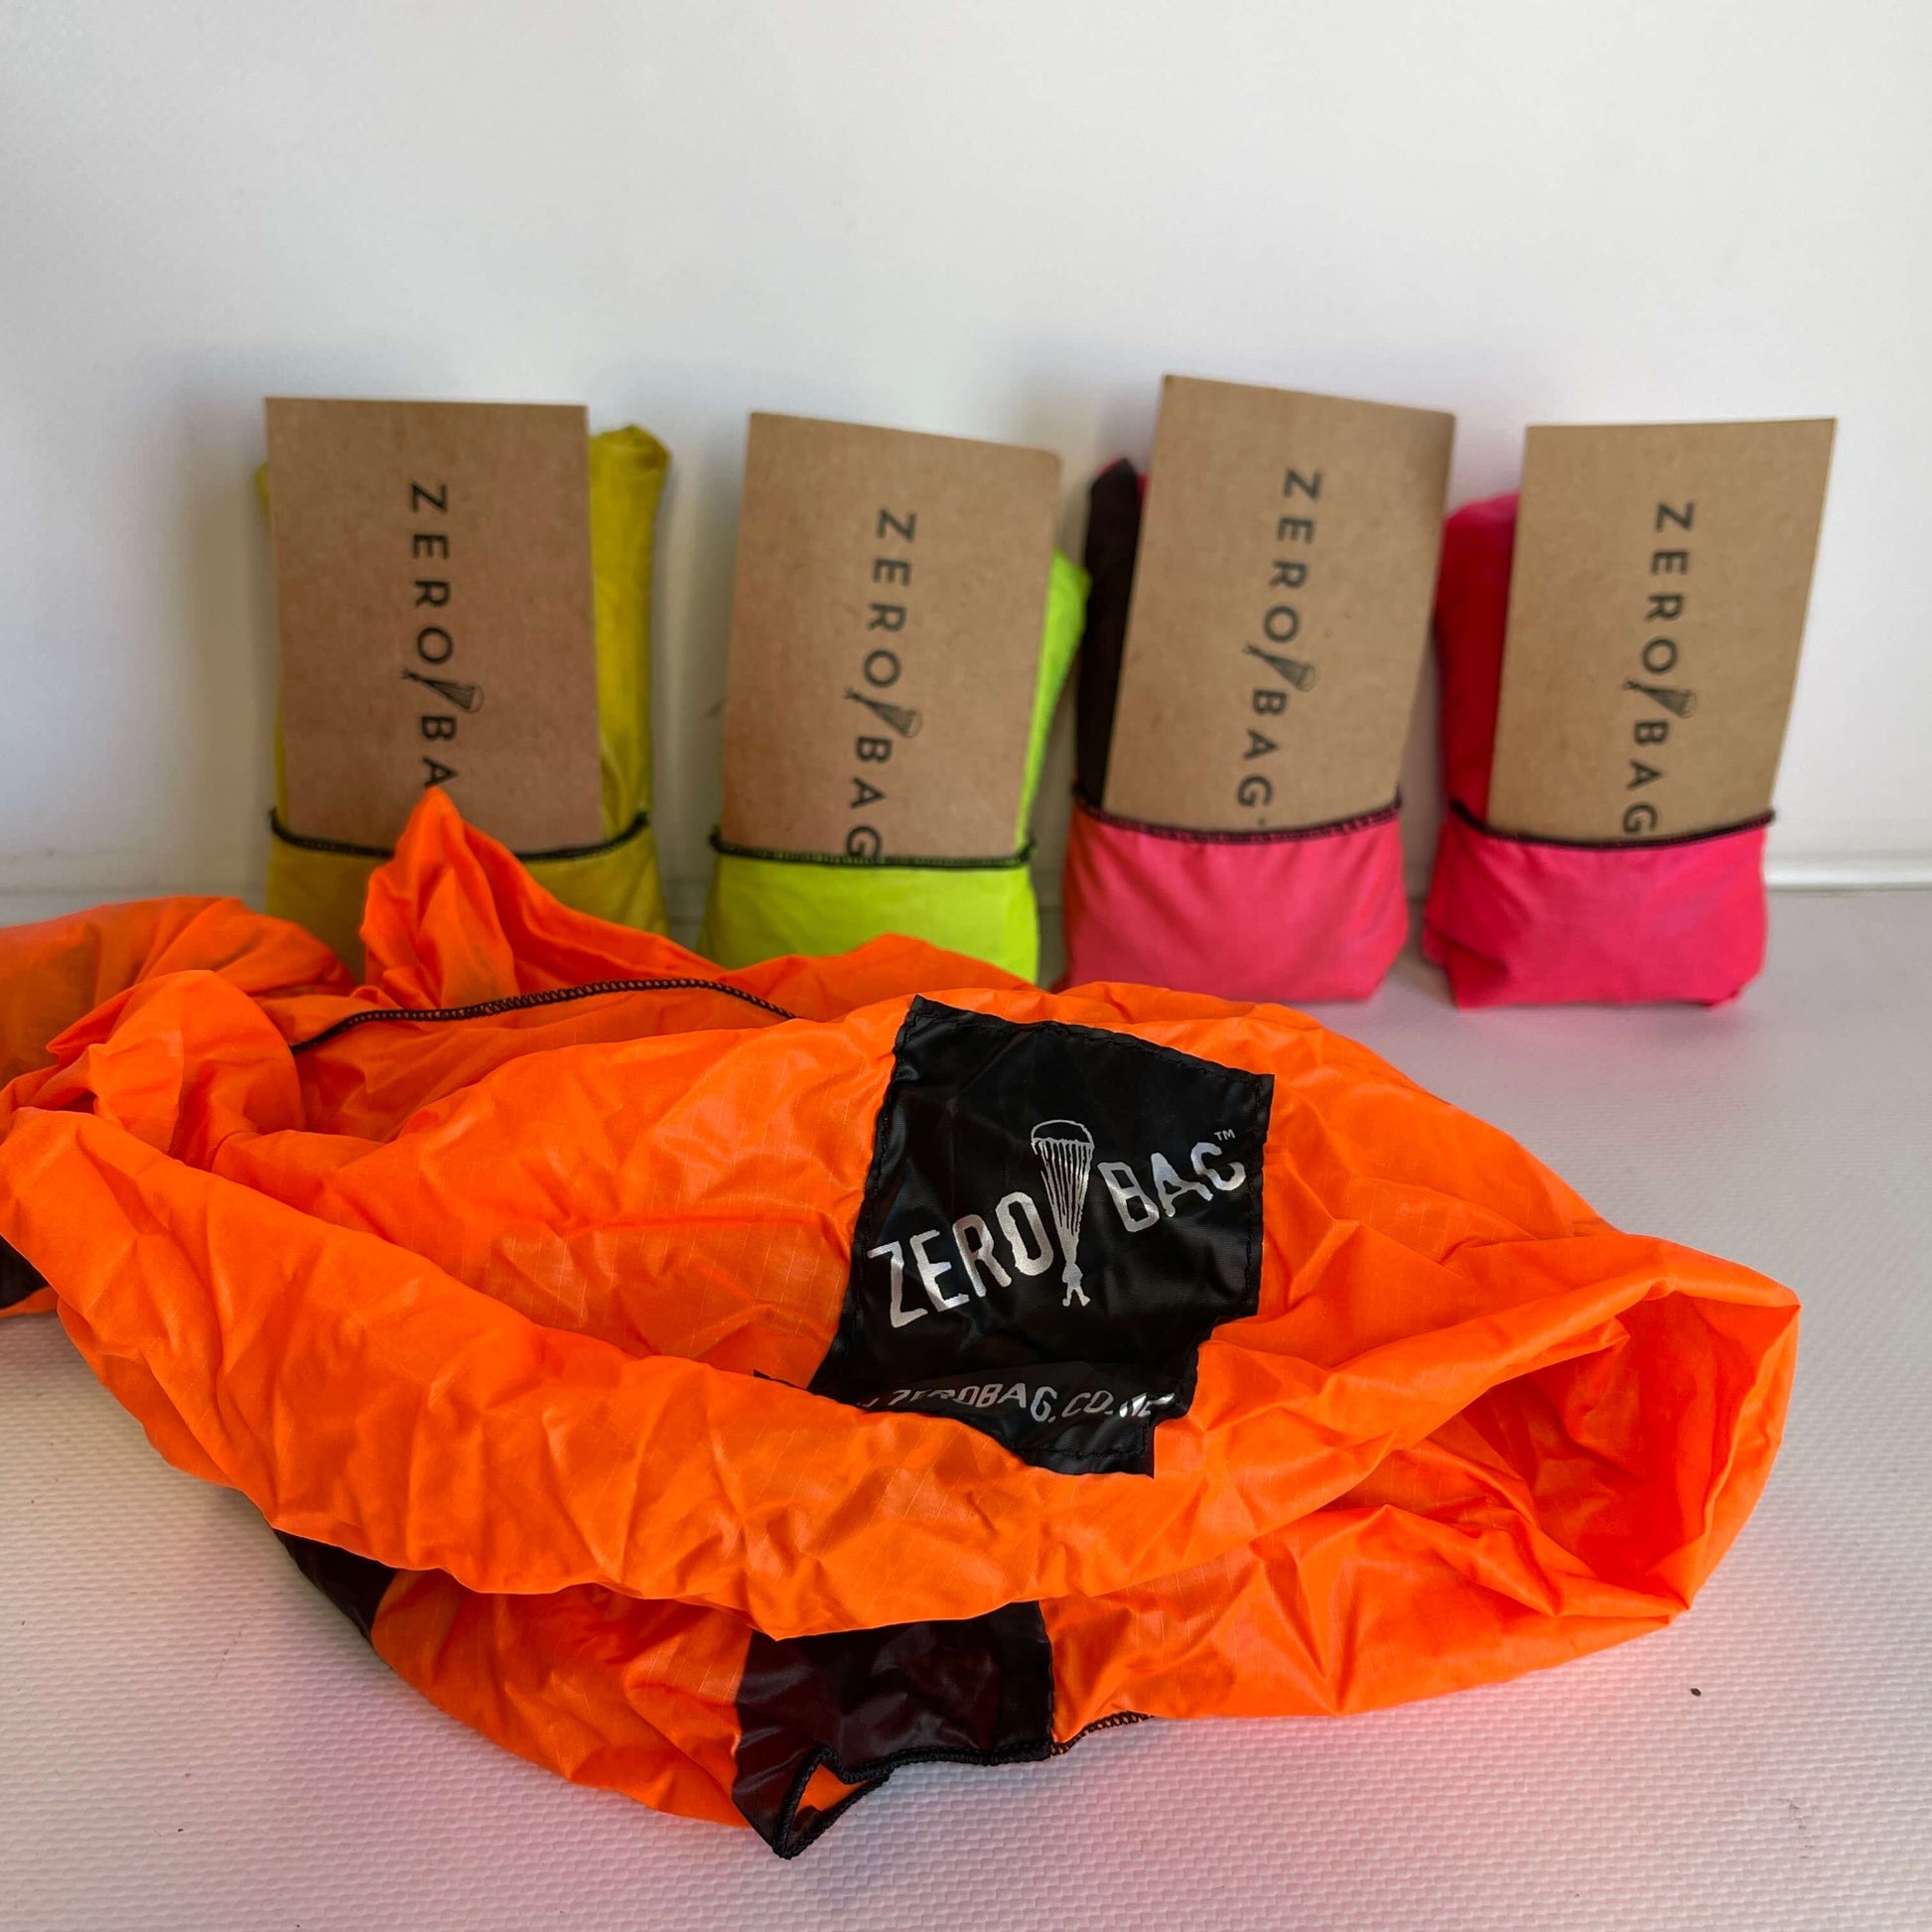 Line up of zero waste tote bags made from parachutes.